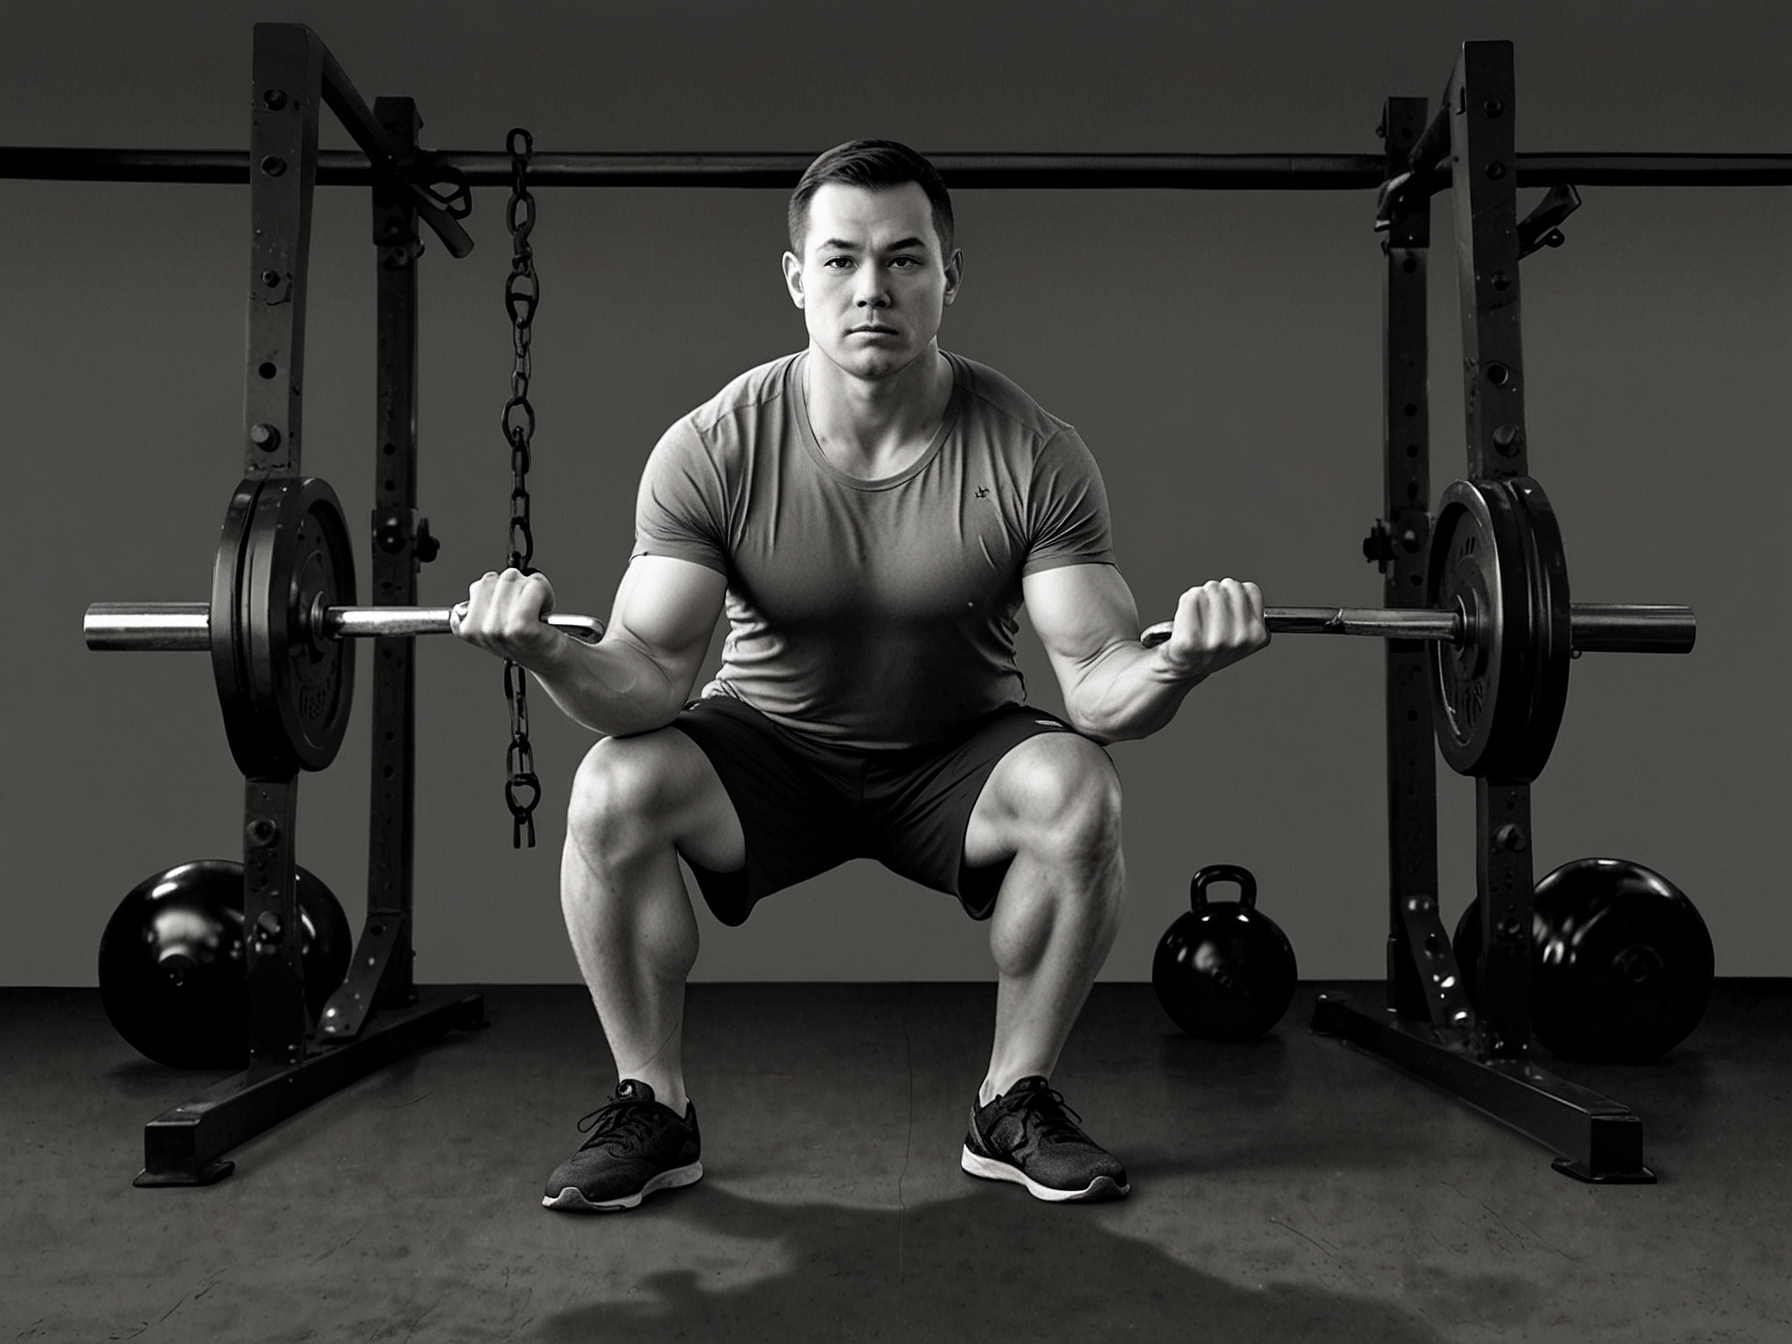 The first image shows a person standing with feet shoulder-width apart, holding a kettlebell close to their chest, and performing the initial good morning hinge of the Kang squat.